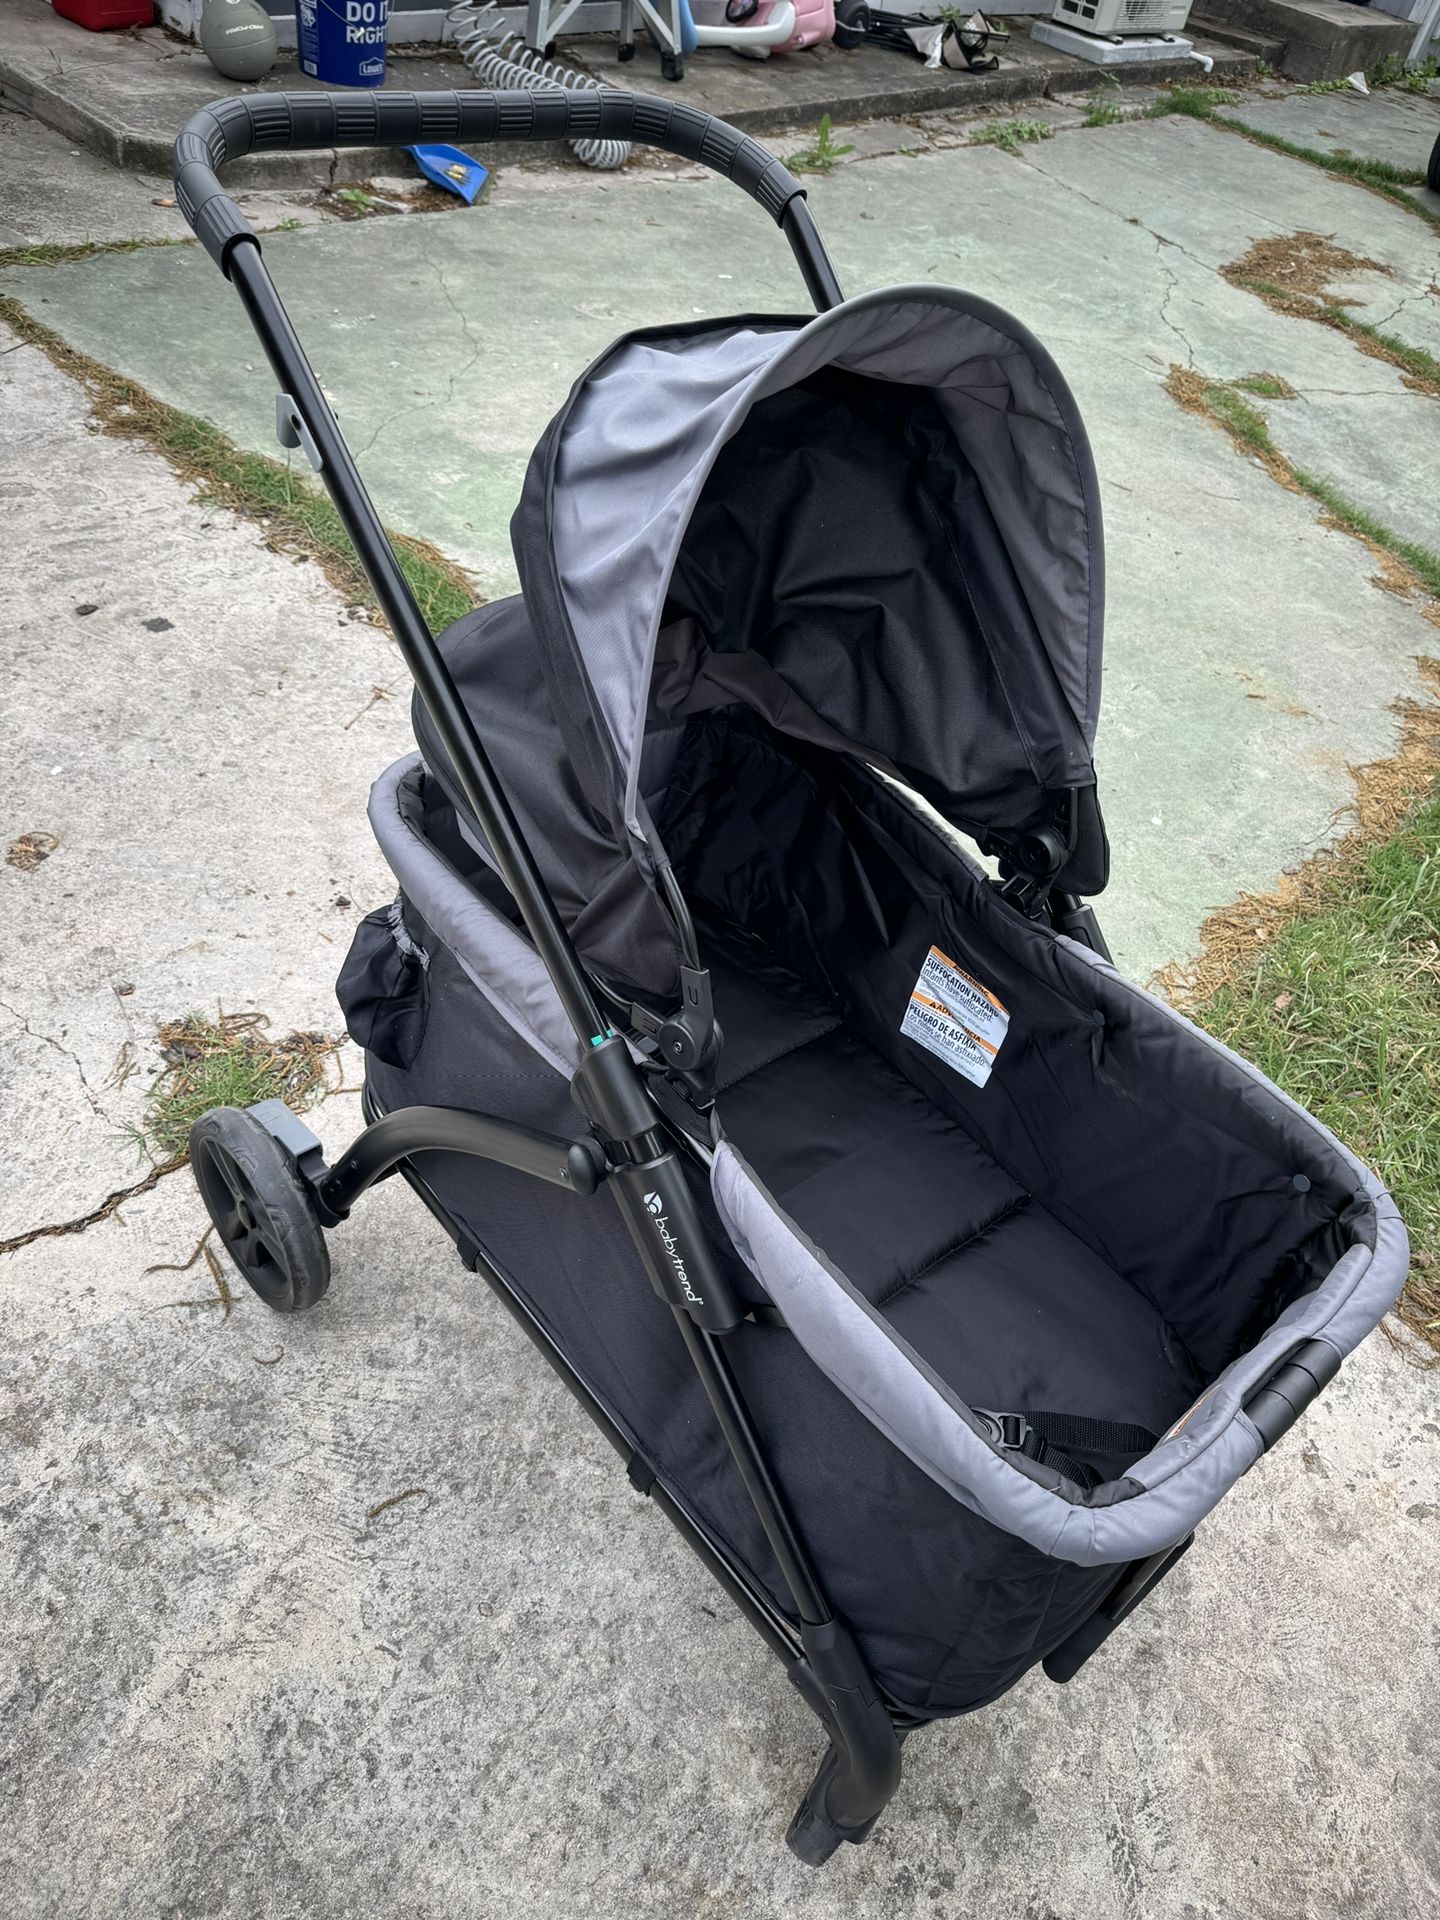 Baby trend 2-in-1 Stroller Wagon